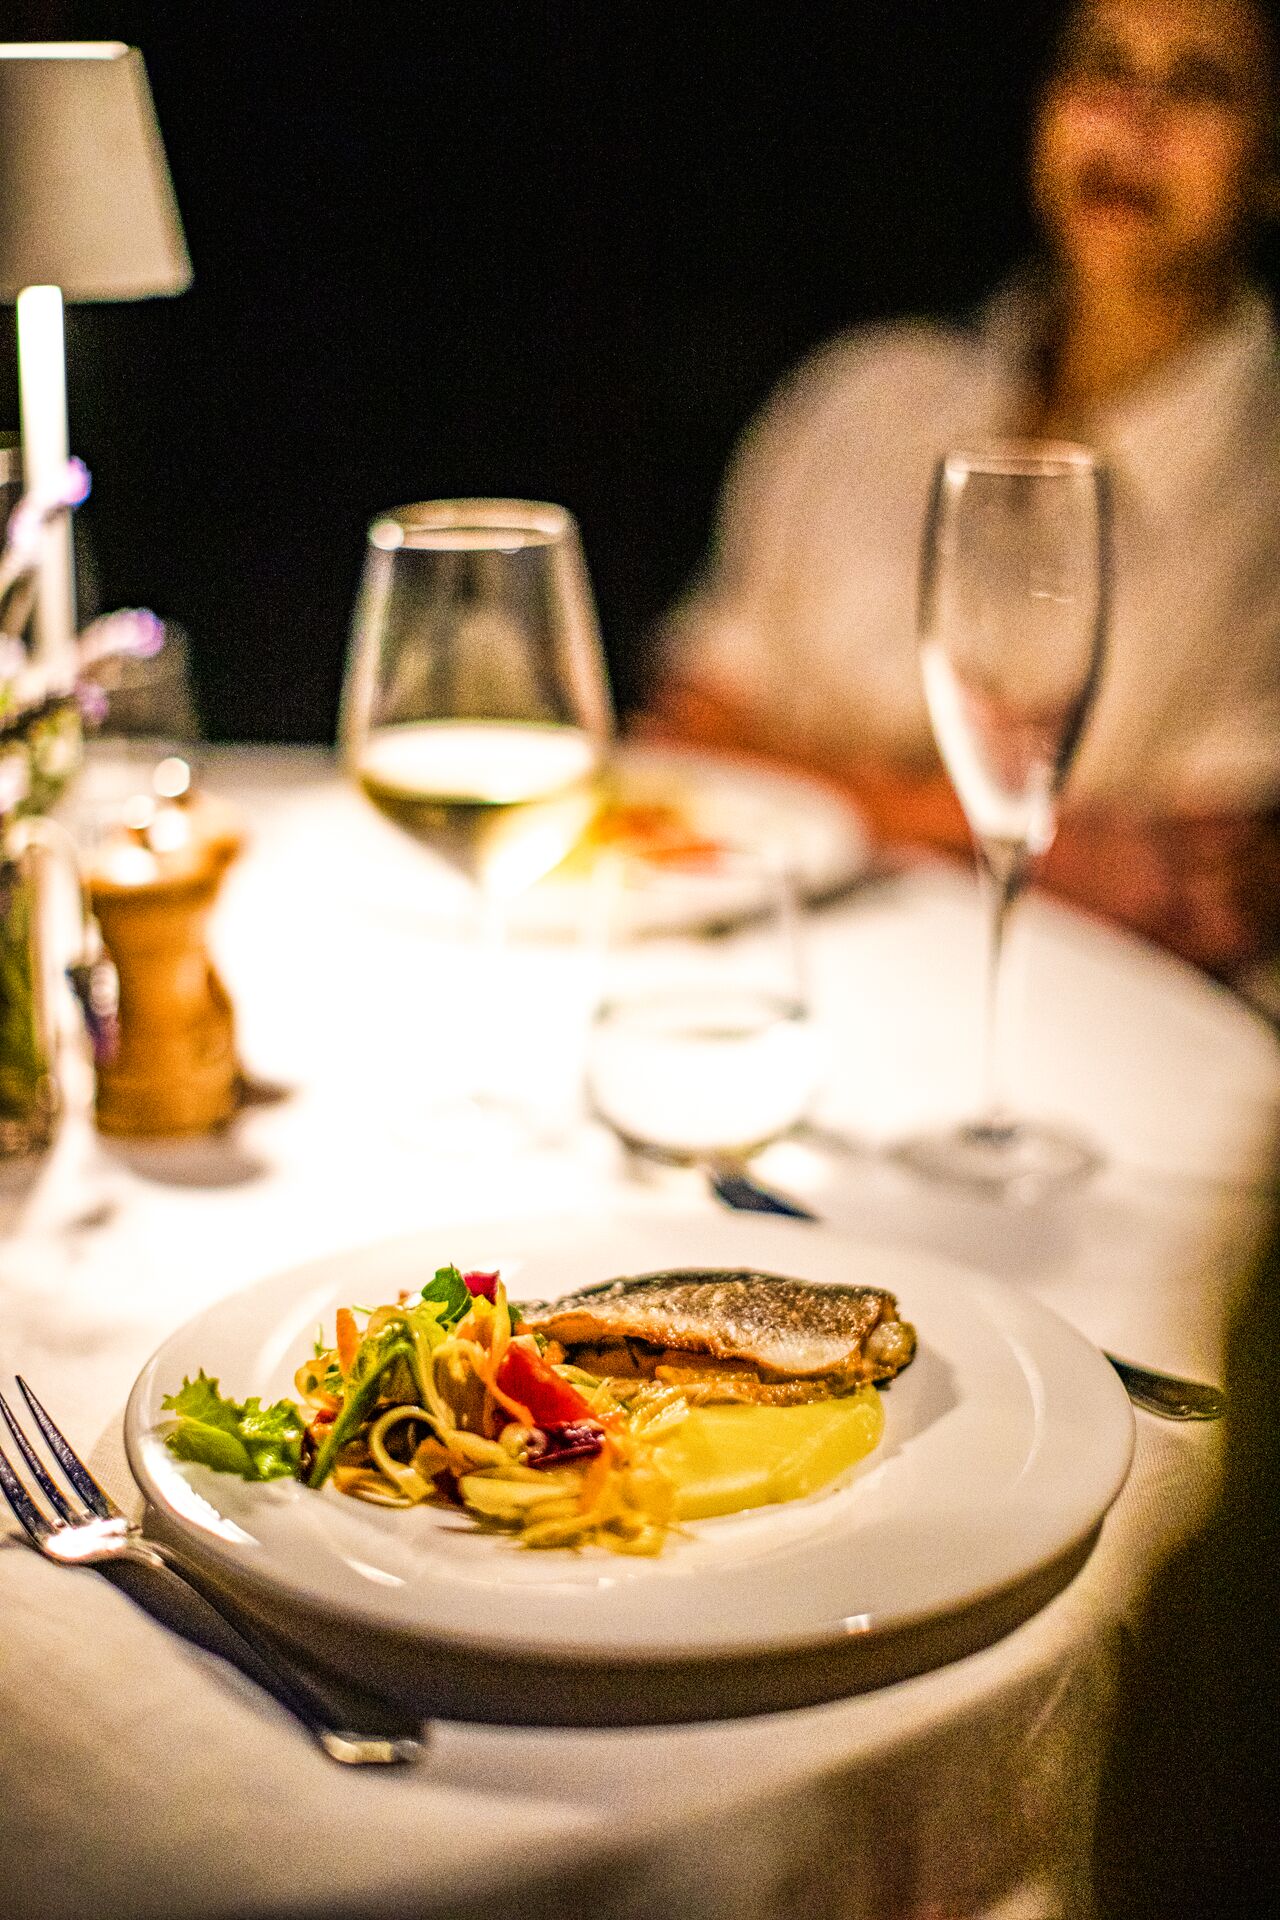 an elegant plate of fish with vegetables shows farm-to-table fine dining in sicily, on a white table cloth with a glass of white wine